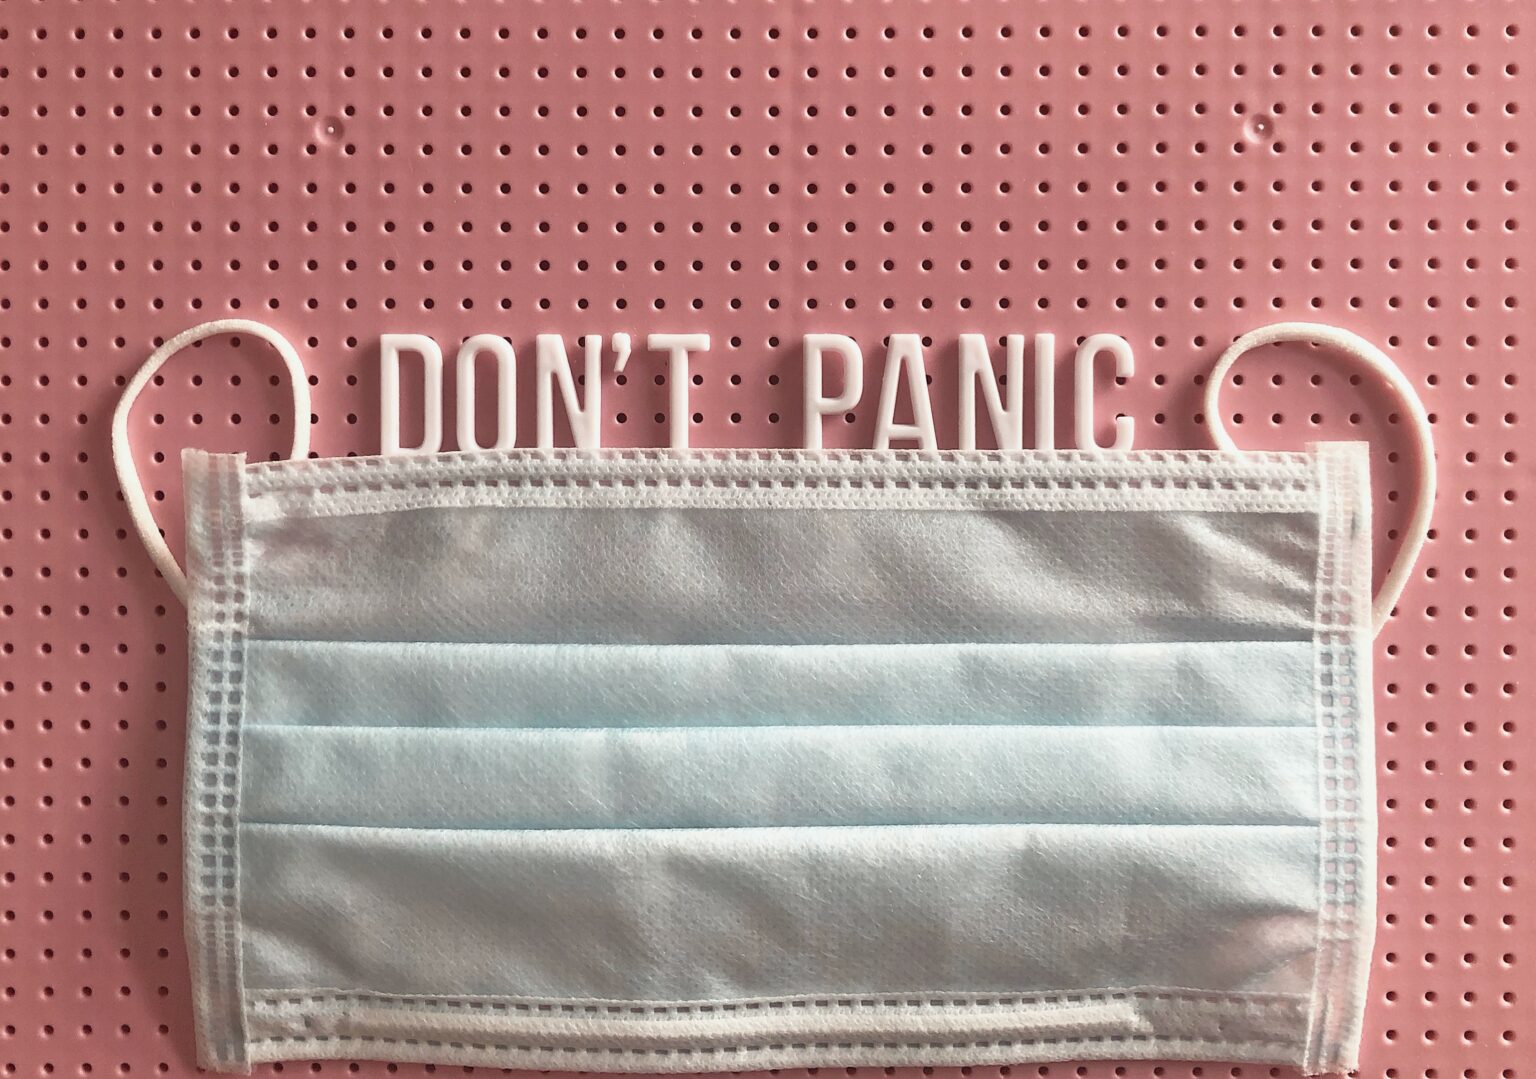 A surgical mask placed above the phrase "don't panic" spelled out on a pink pegboard at an affordable Dallas dental clinic.